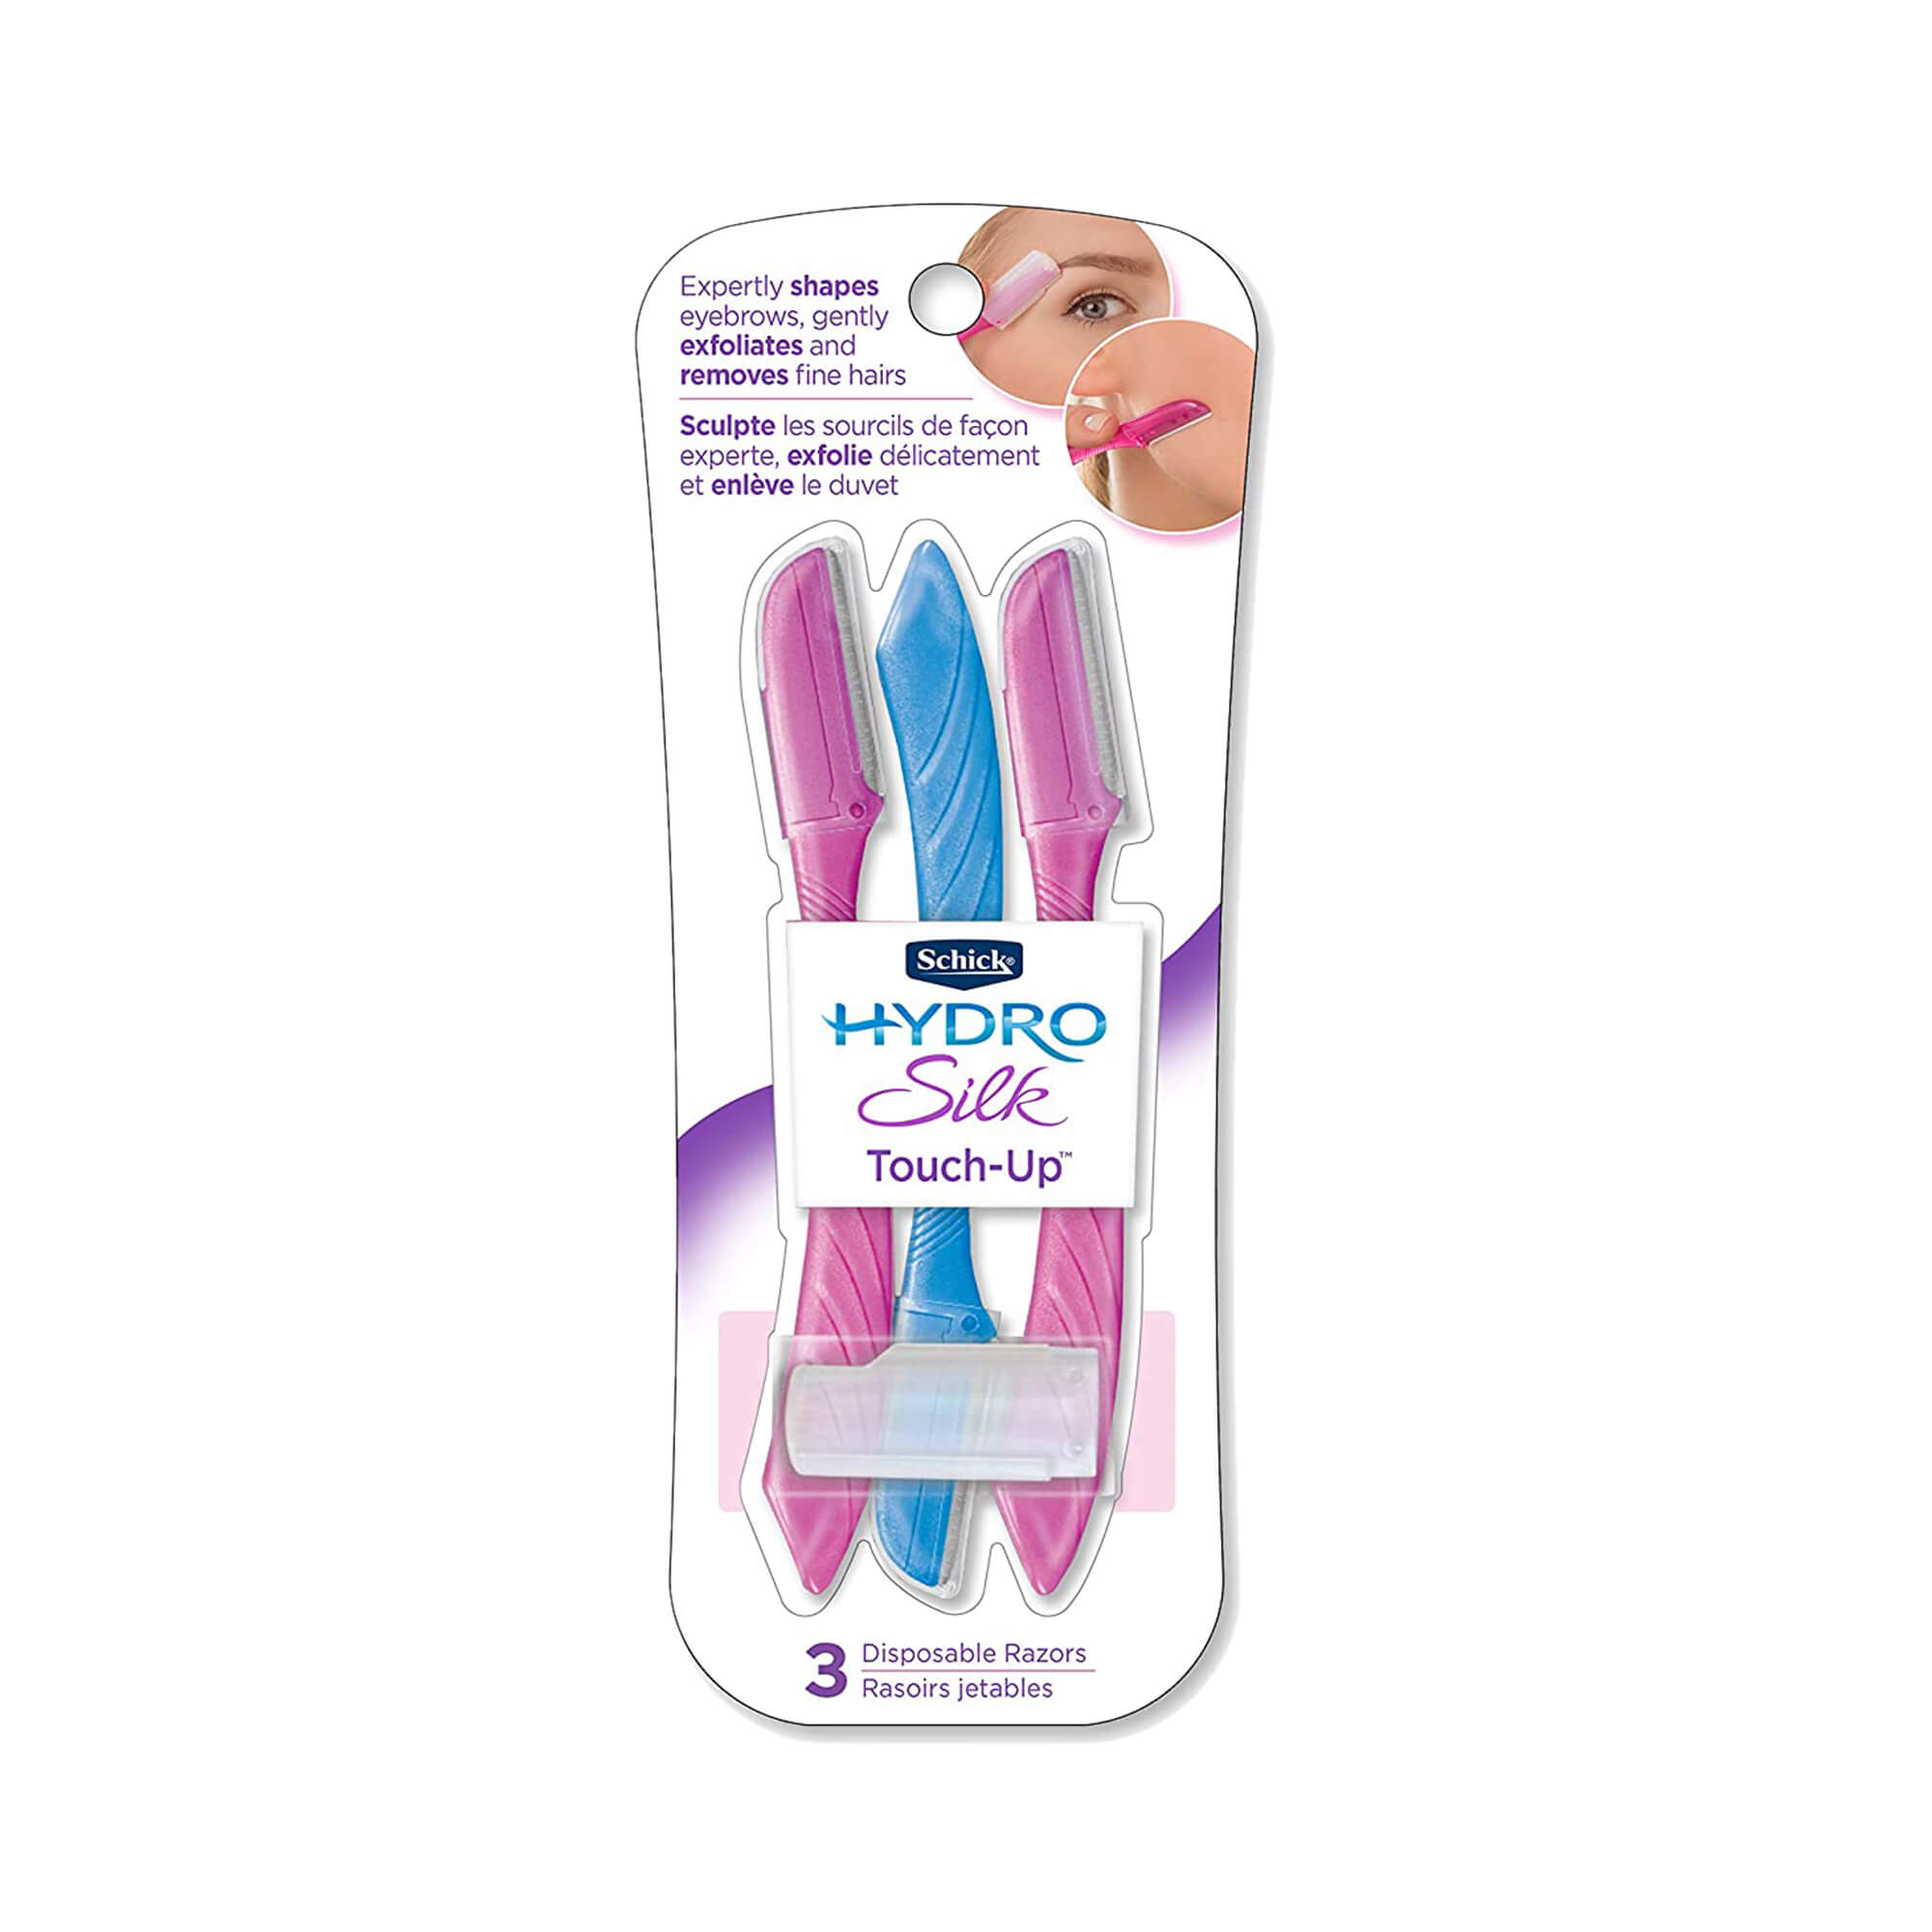 Schick Hydro Silk Touch-Up Multipurpose Exfoliating Dermaplaning Tool with Precision Cover, 3 Count